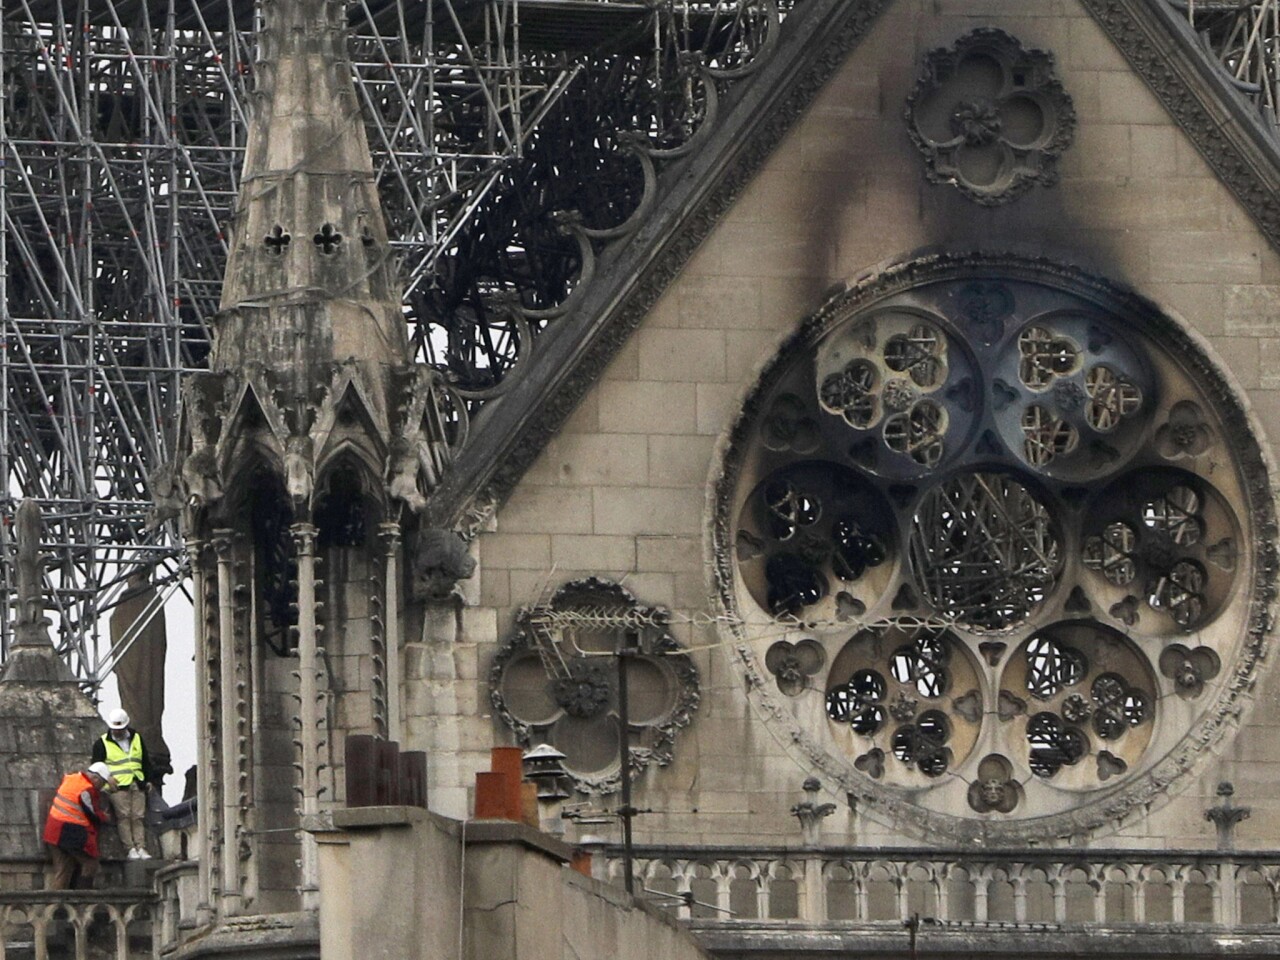 Experts inspect the damaged Notre Dame cathedral after the fire in Paris.